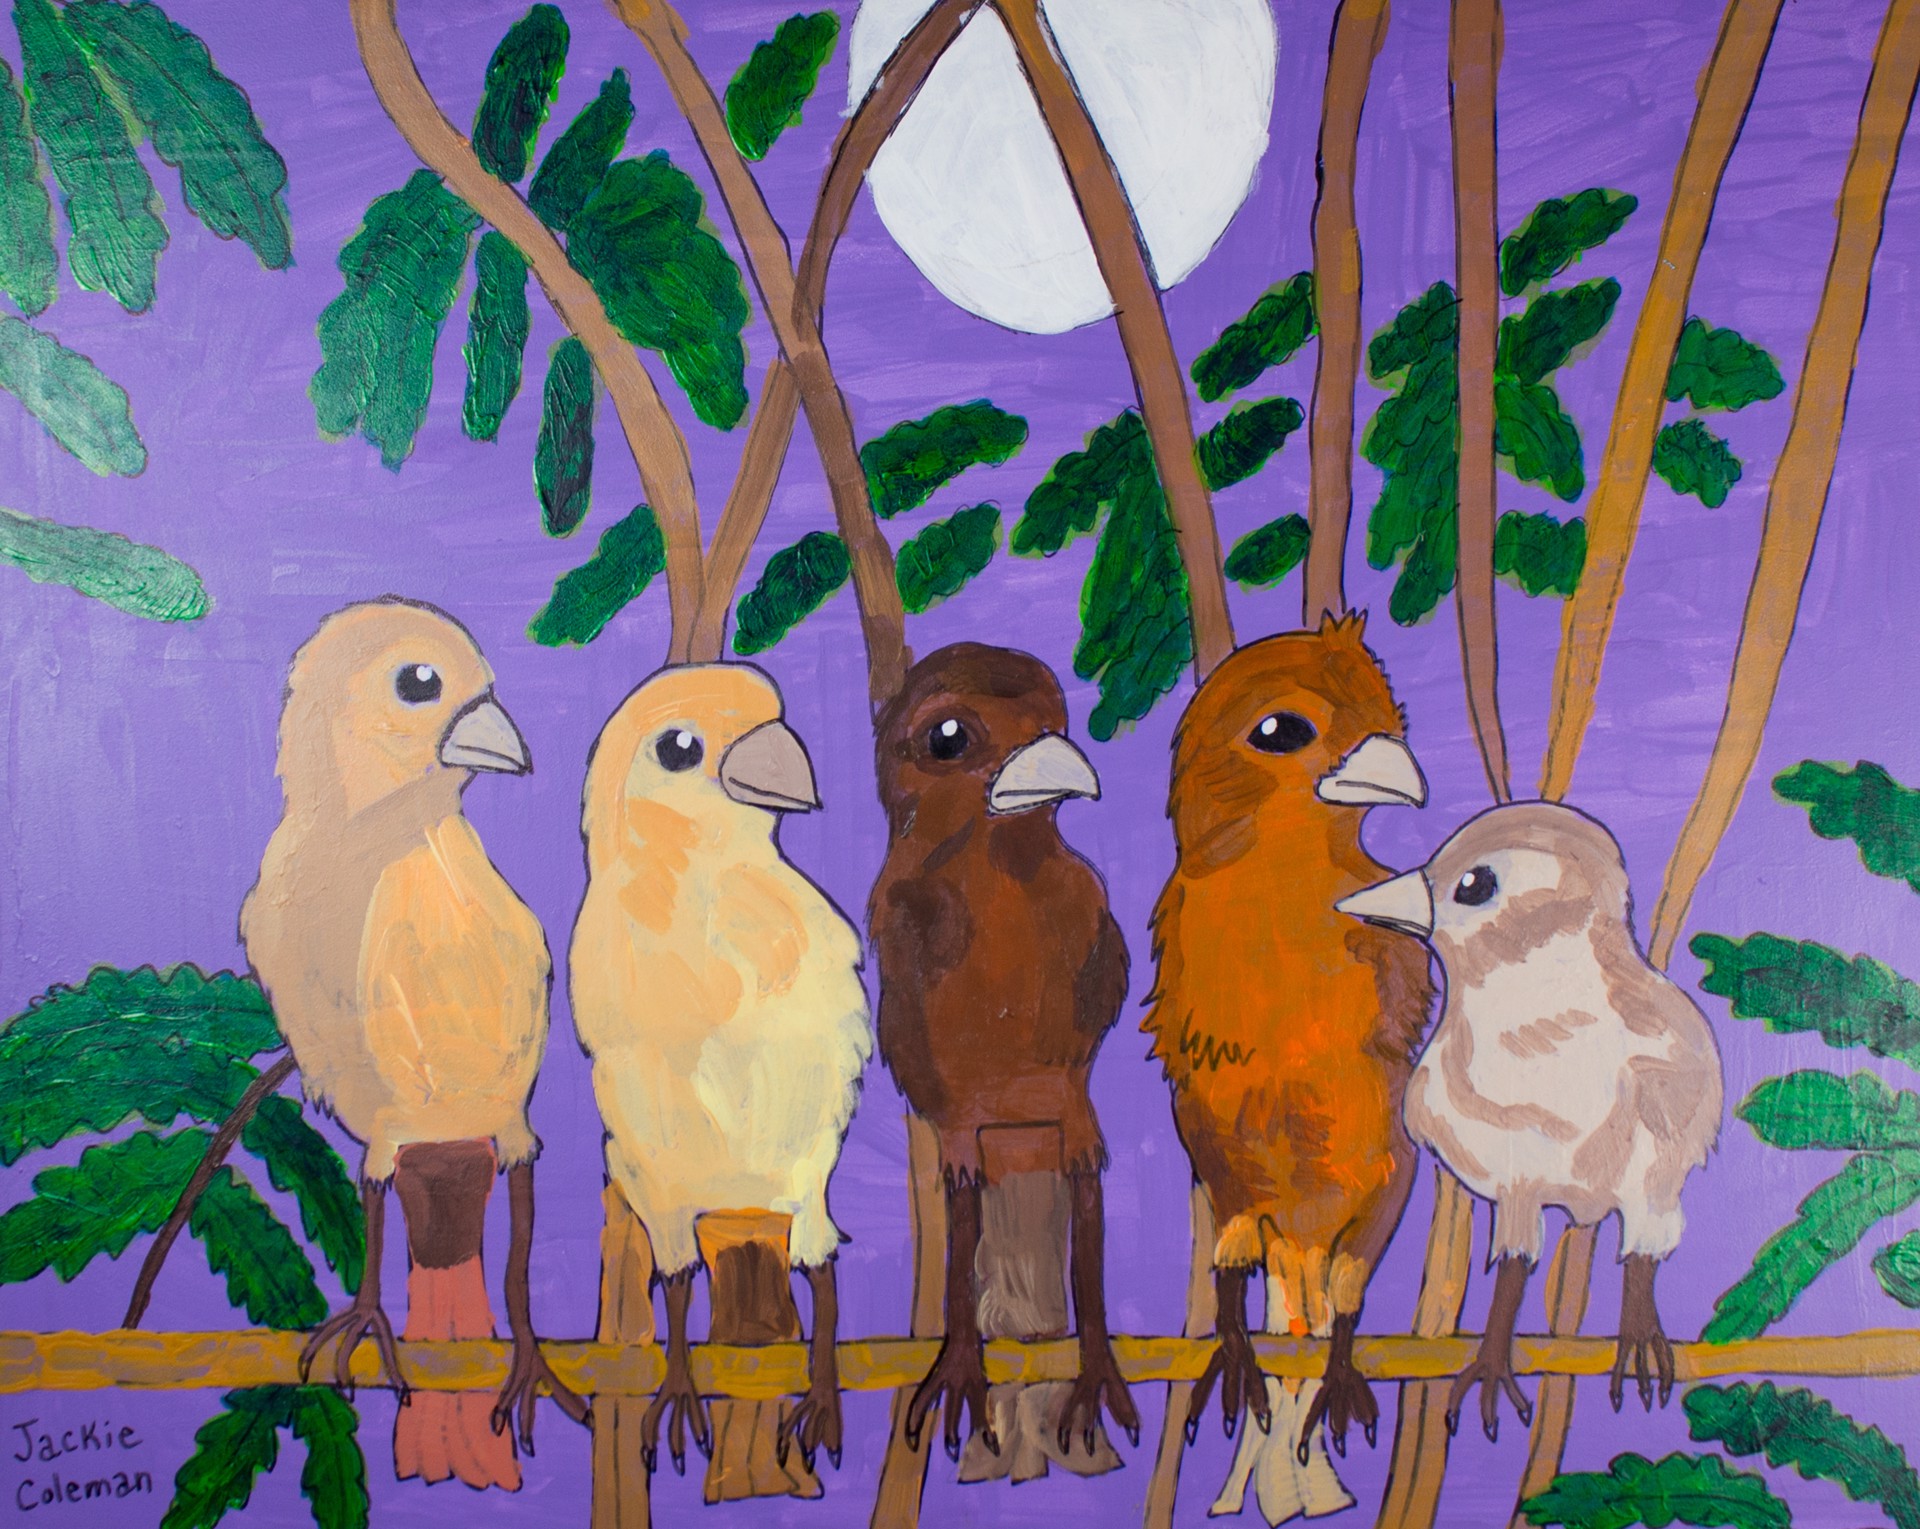 The Five Singing Birds! by Jacqueline Coleman